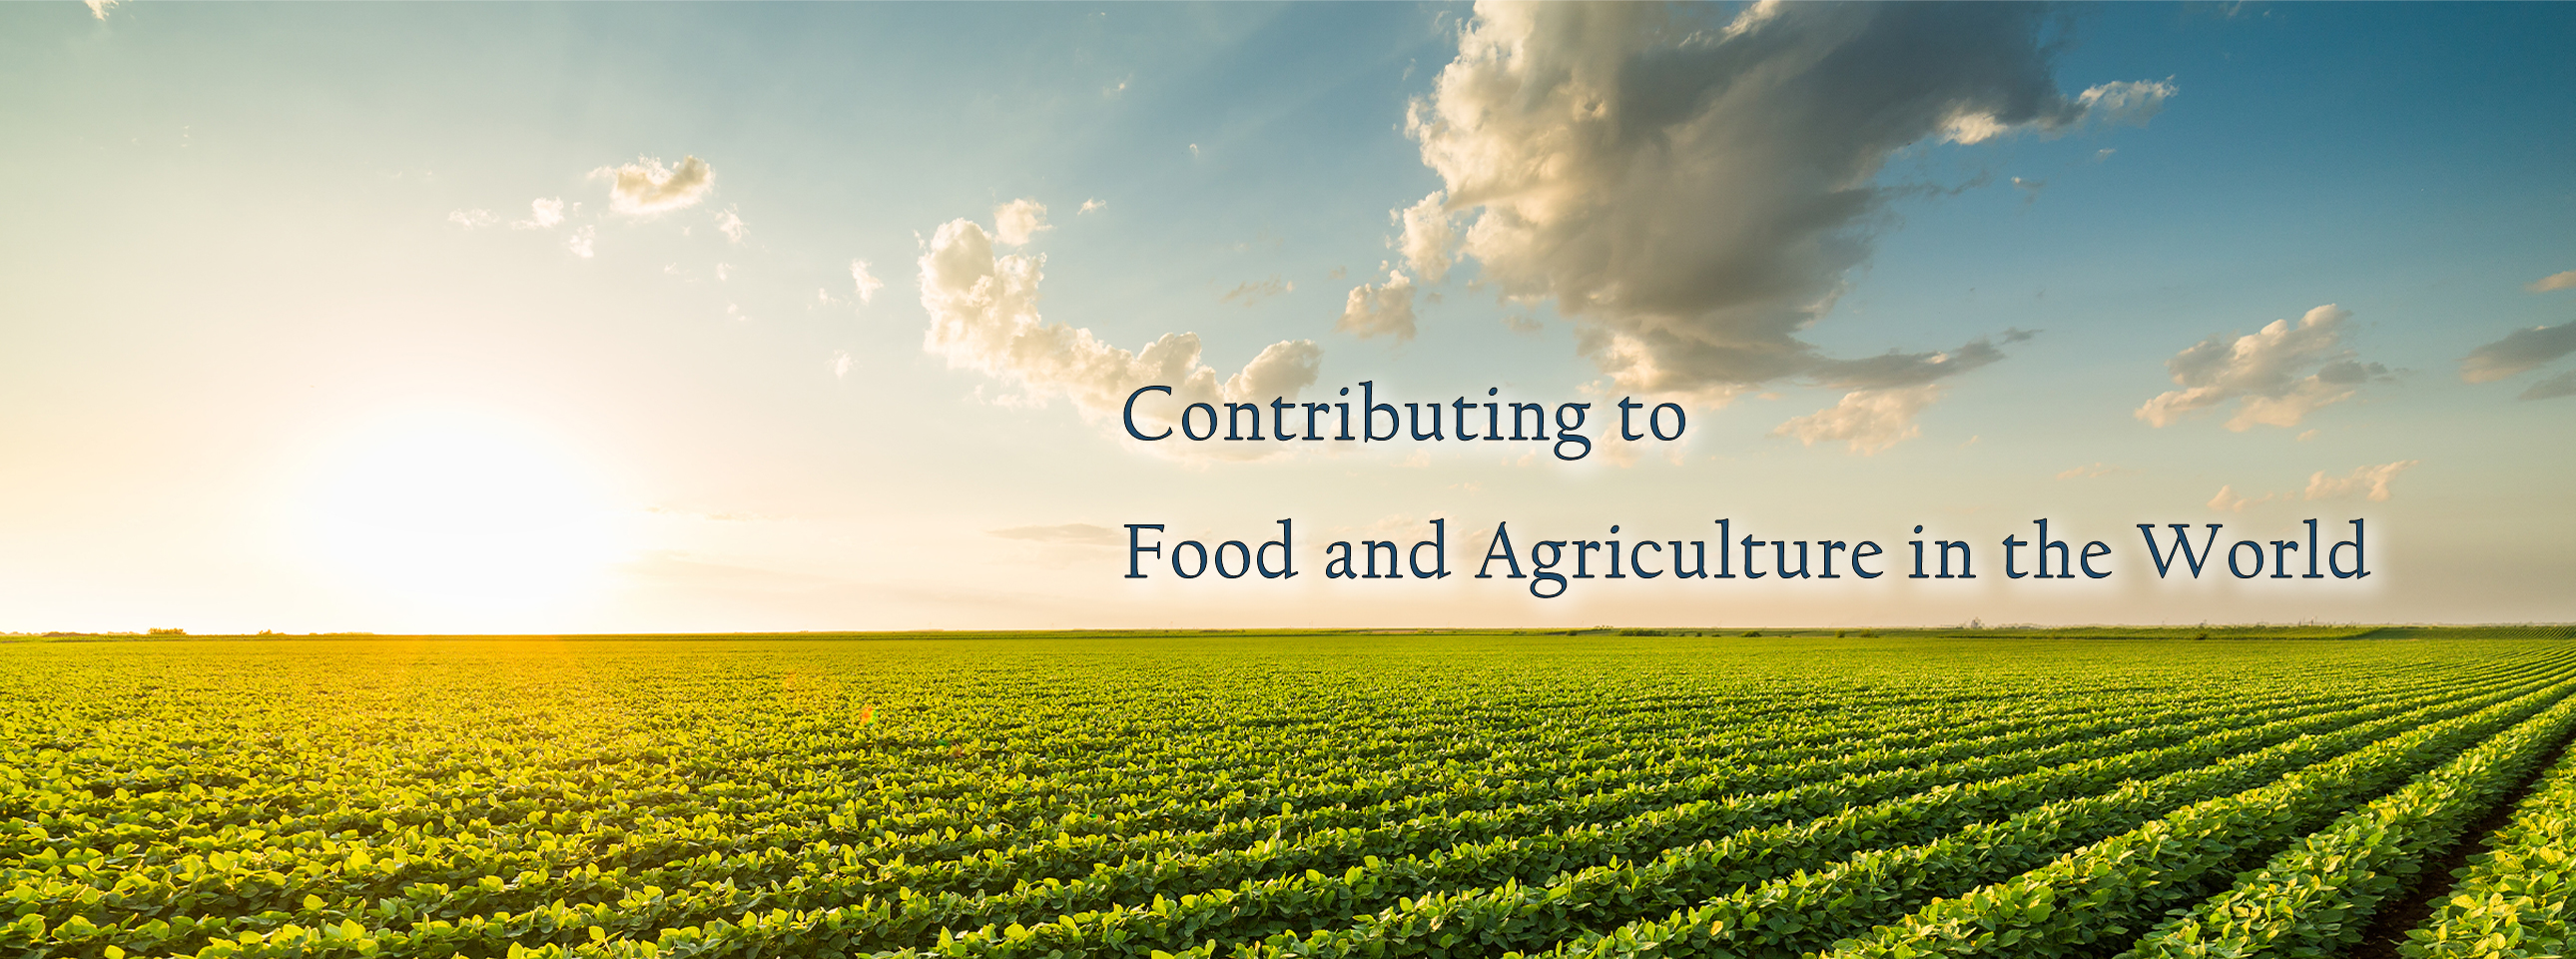 Contributing to Food and Agriculture in the World